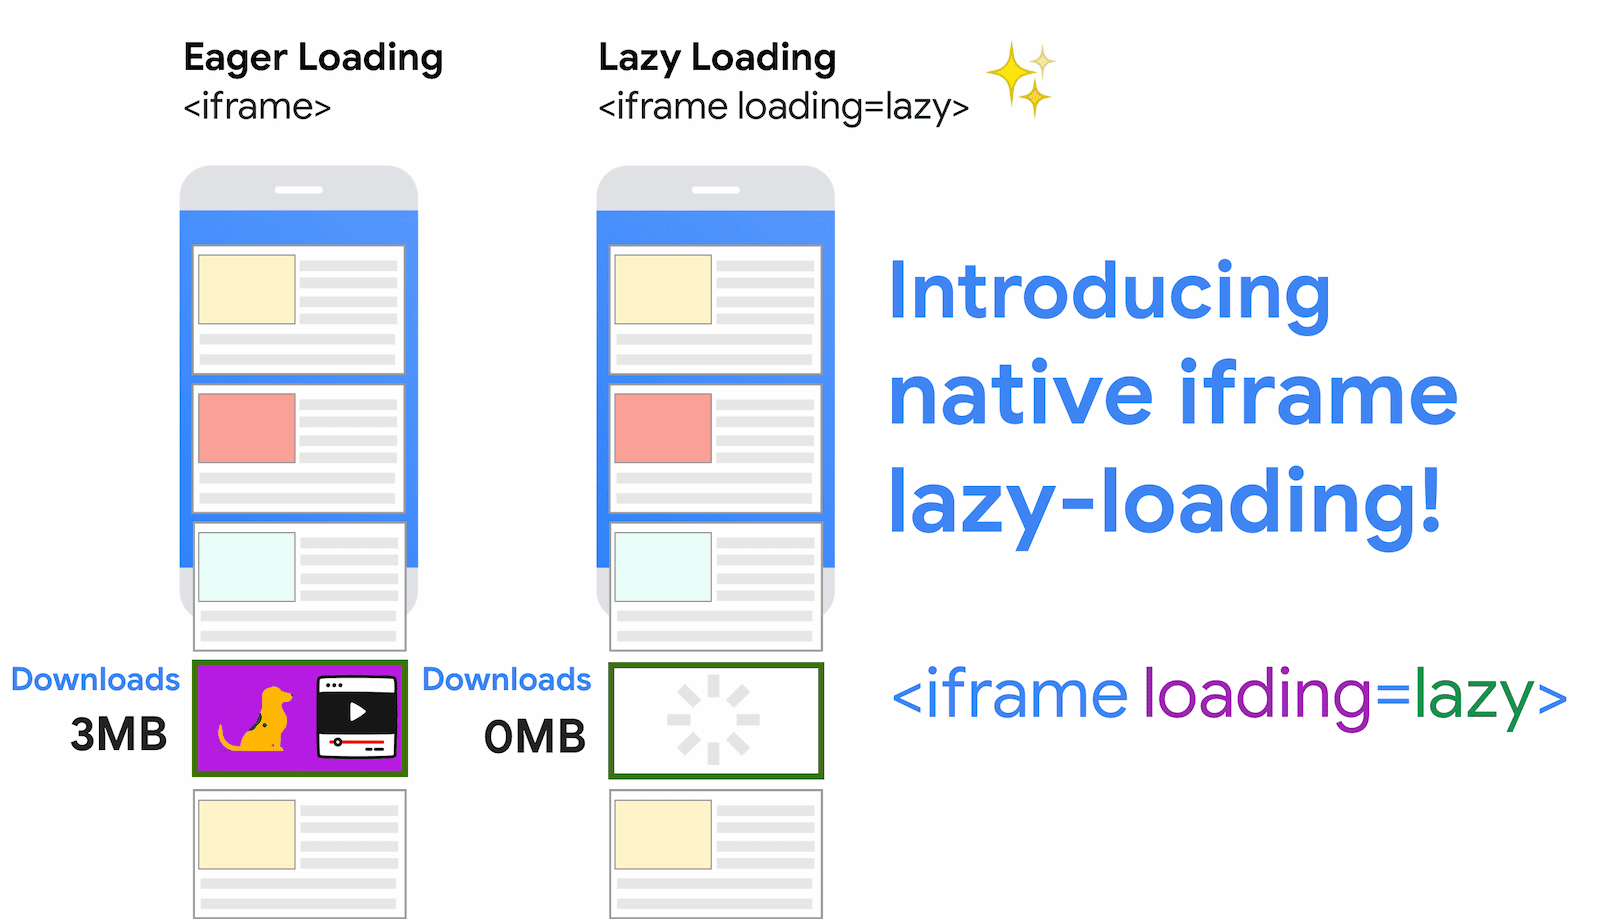 Data-savings from using iframe lazy-loading for an iframe. Eager loading pulls in 3MB in this example, while lazy-loading does not pull in this code until the user scrolls closer to the iframe.